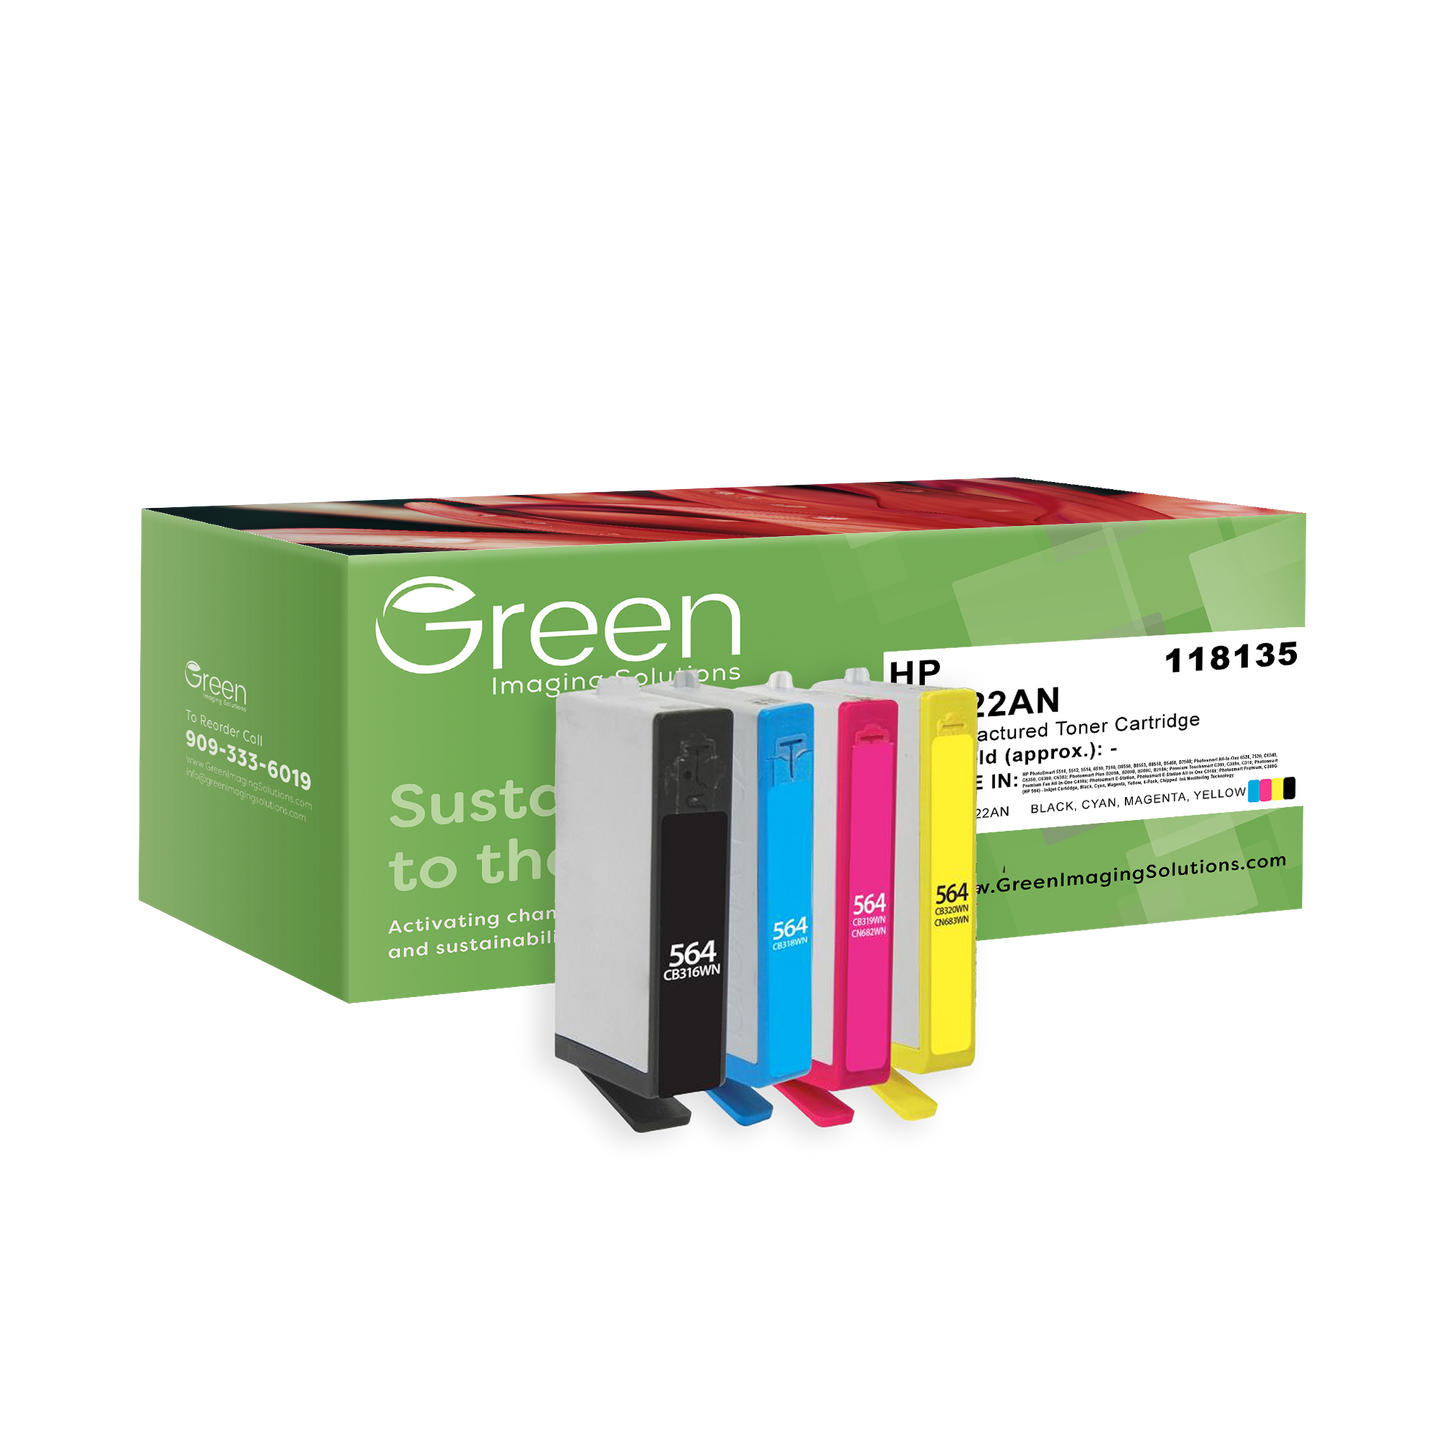 Green Imaging Solutions USA Remanufactured Black, Cyan, Magenta, Yellow Ink Cartridges for HP 564 (3YQ22AN) 4-Pack